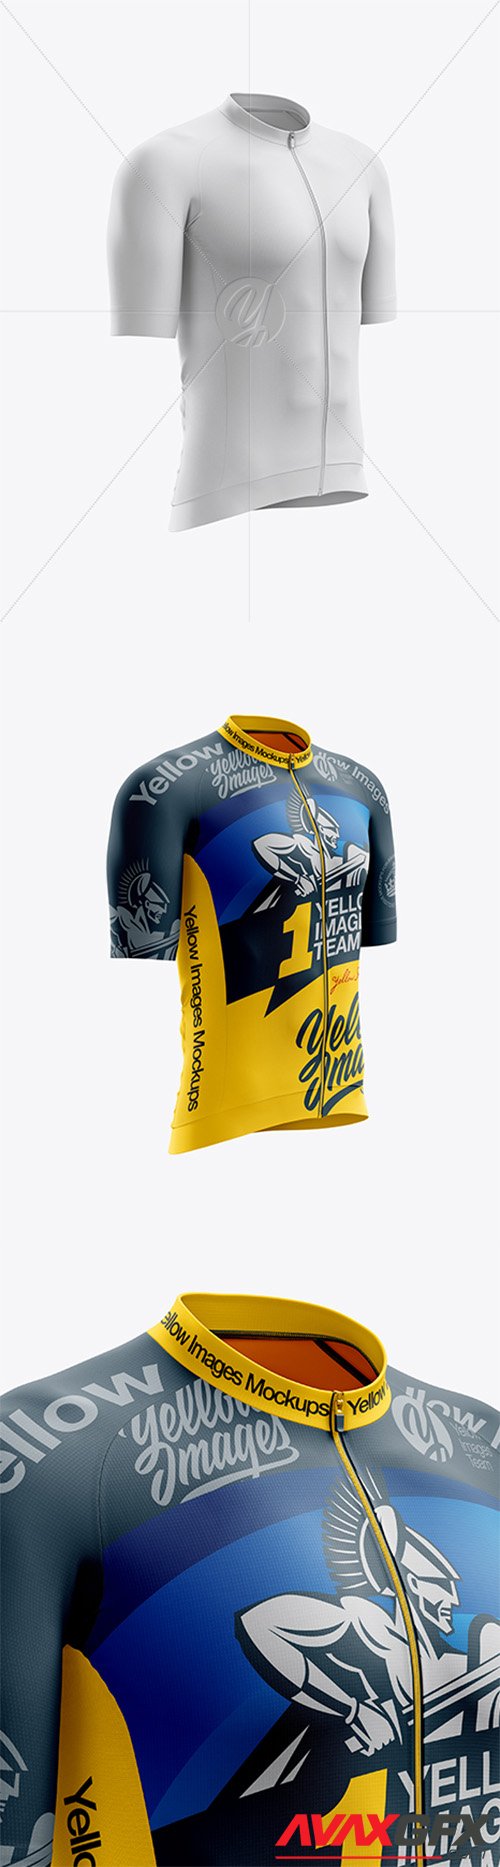 Men’s Cycling Speed Jersey mockup (Right Half Side View) 24924